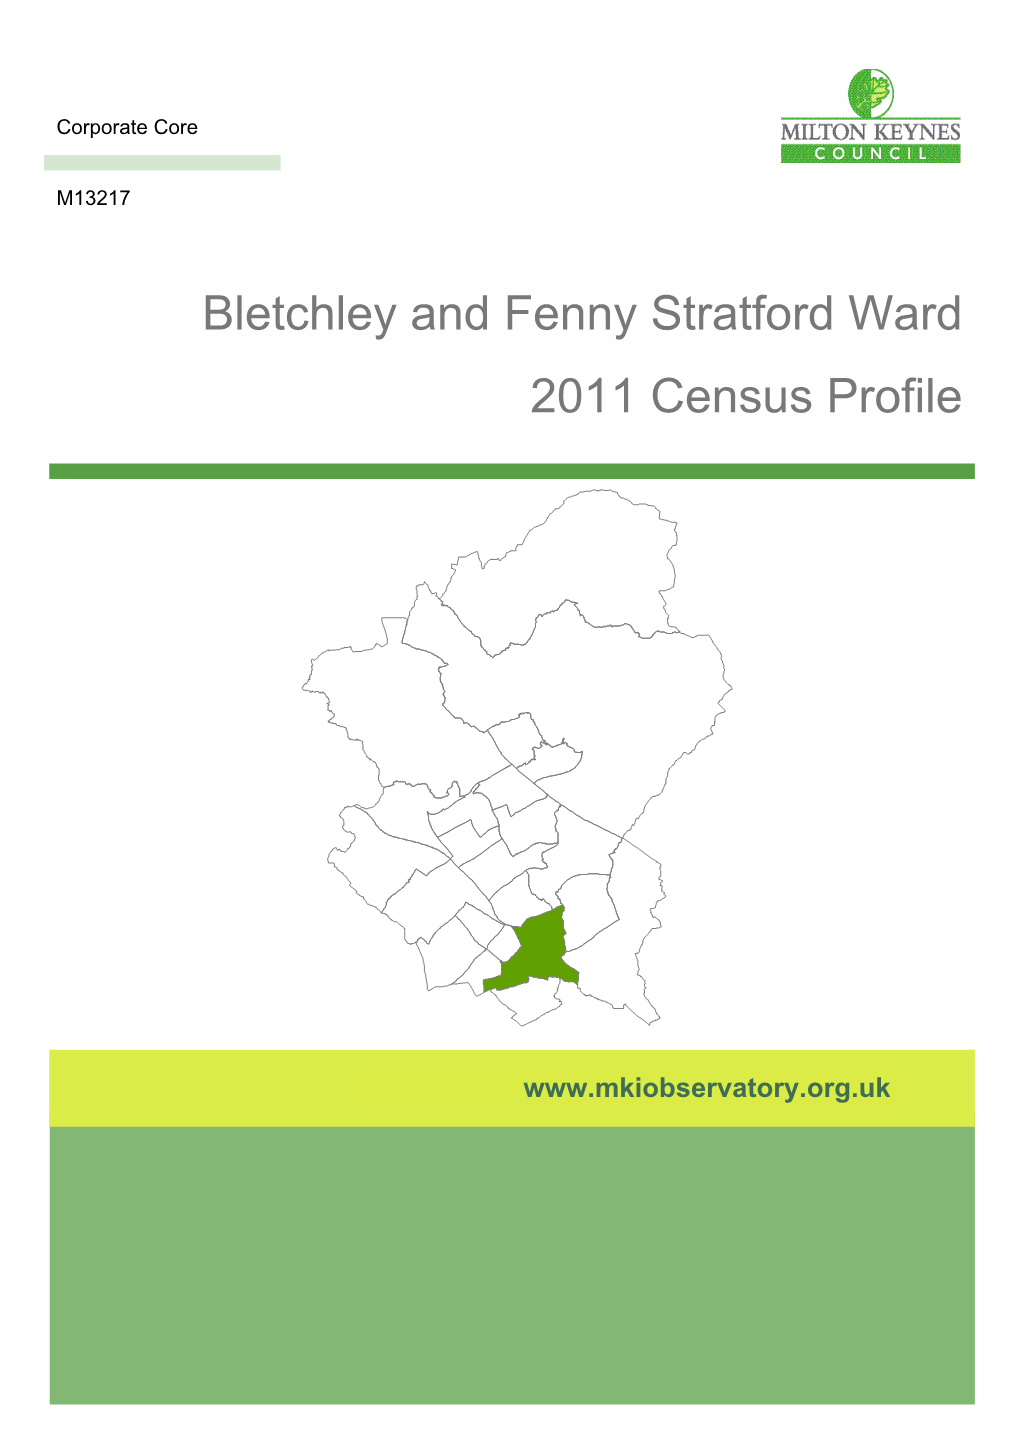 Bletchley and Fenny Stratford Ward 2011 Census Profile